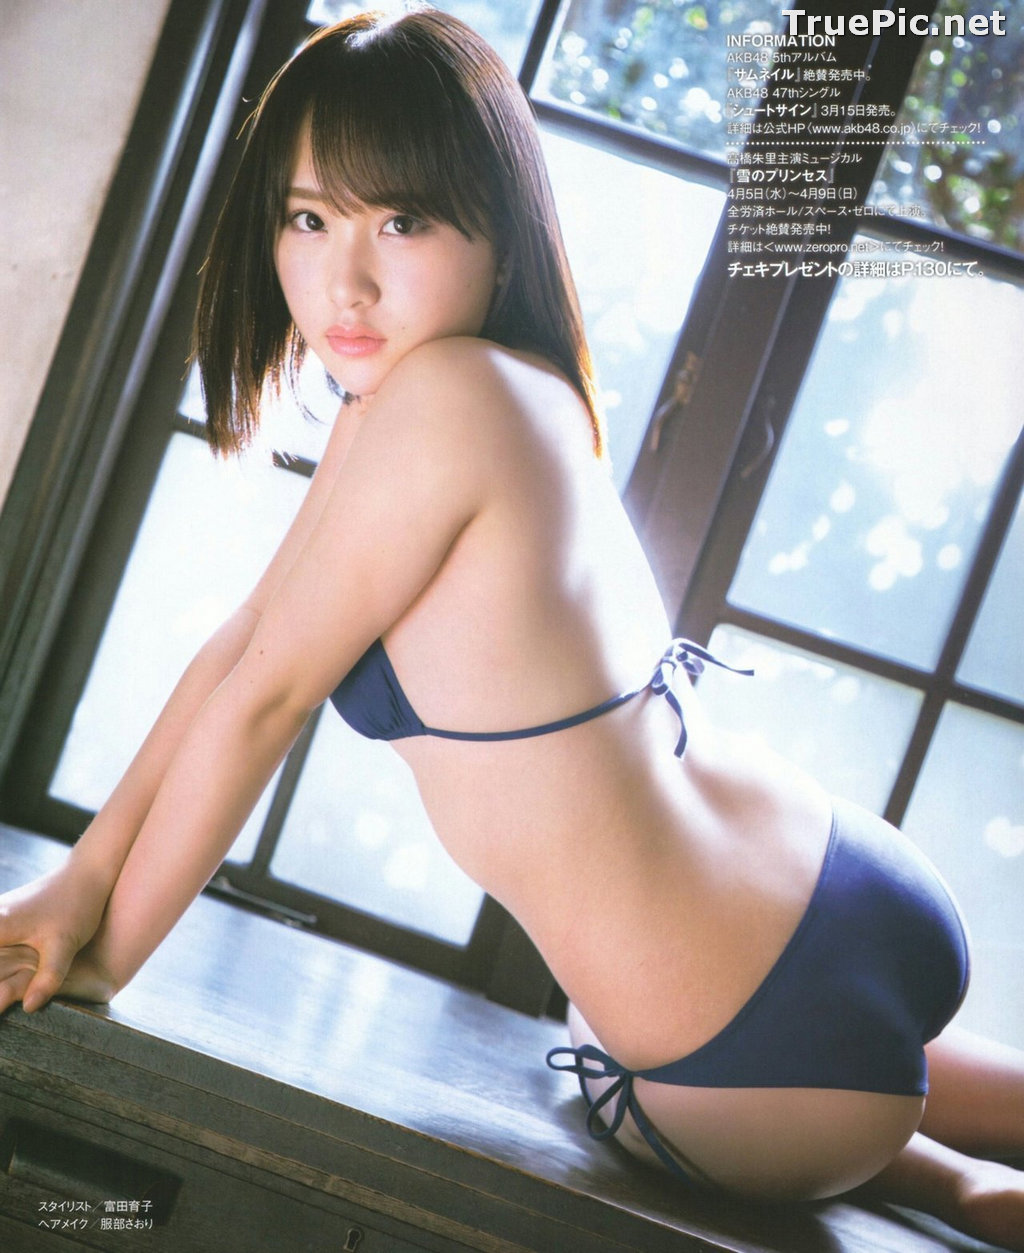 Image Japanese Beauty – Juri Takahashi - Sexy Picture Collection 2020 - TruePic.net - Picture-47